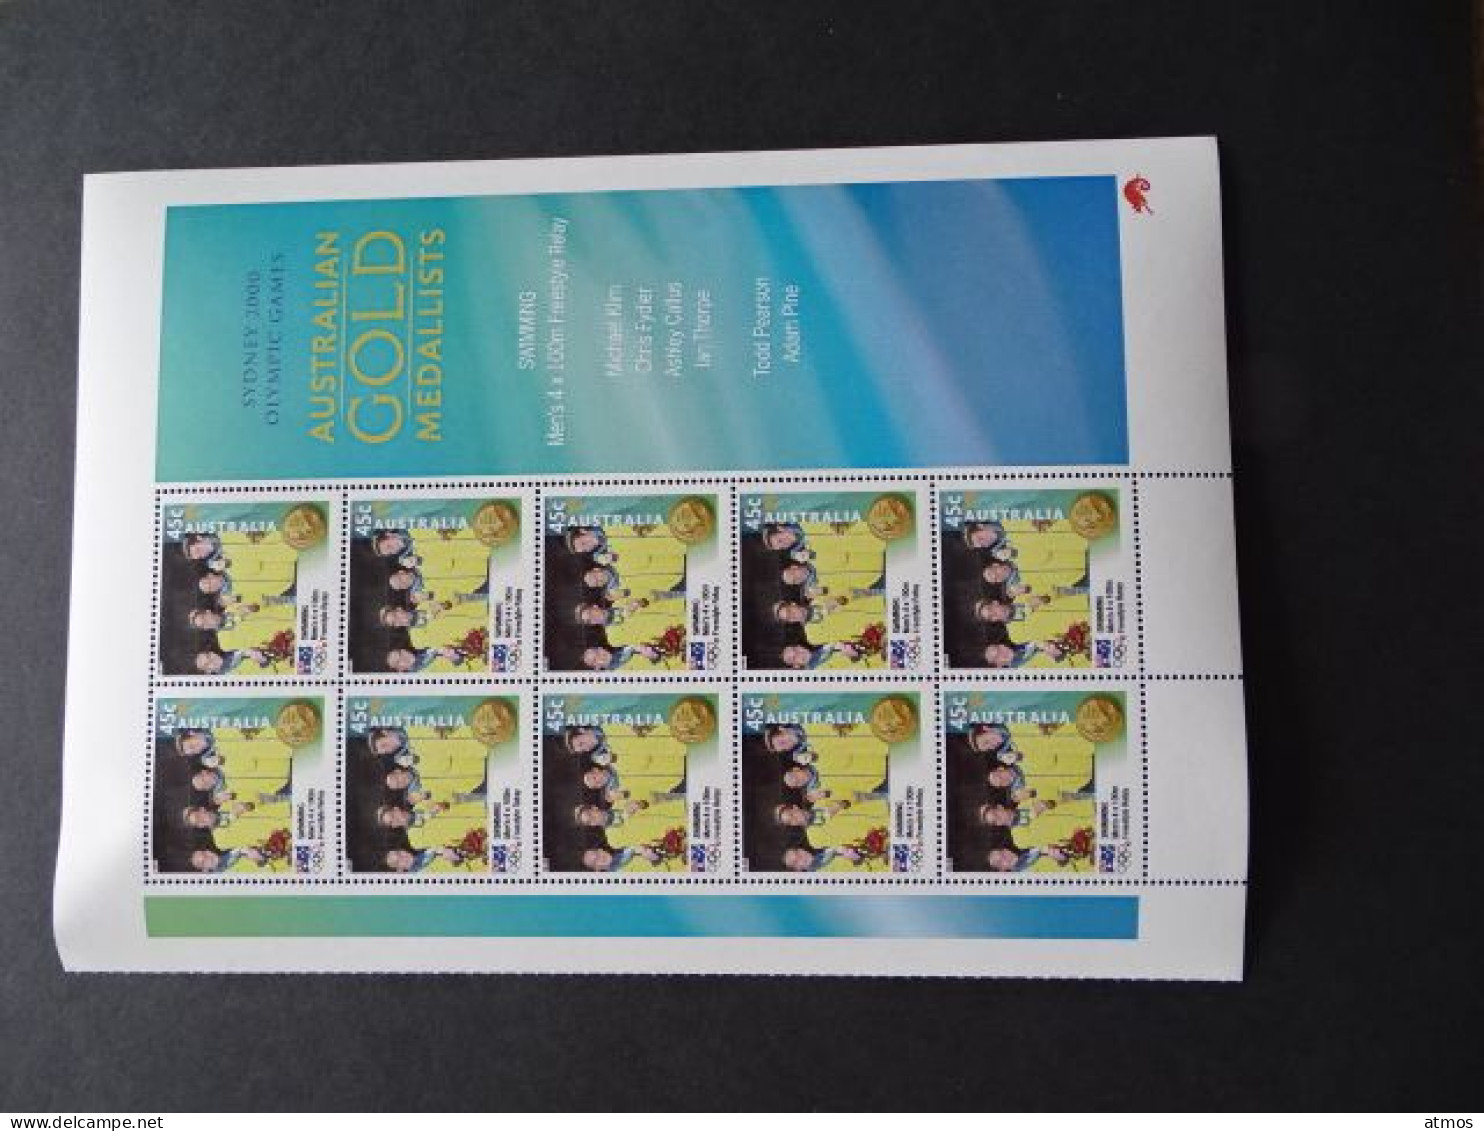 Australia MNH Michel Nr 1974 Sheet Of 10 From 2000 VIC - Mint Stamps